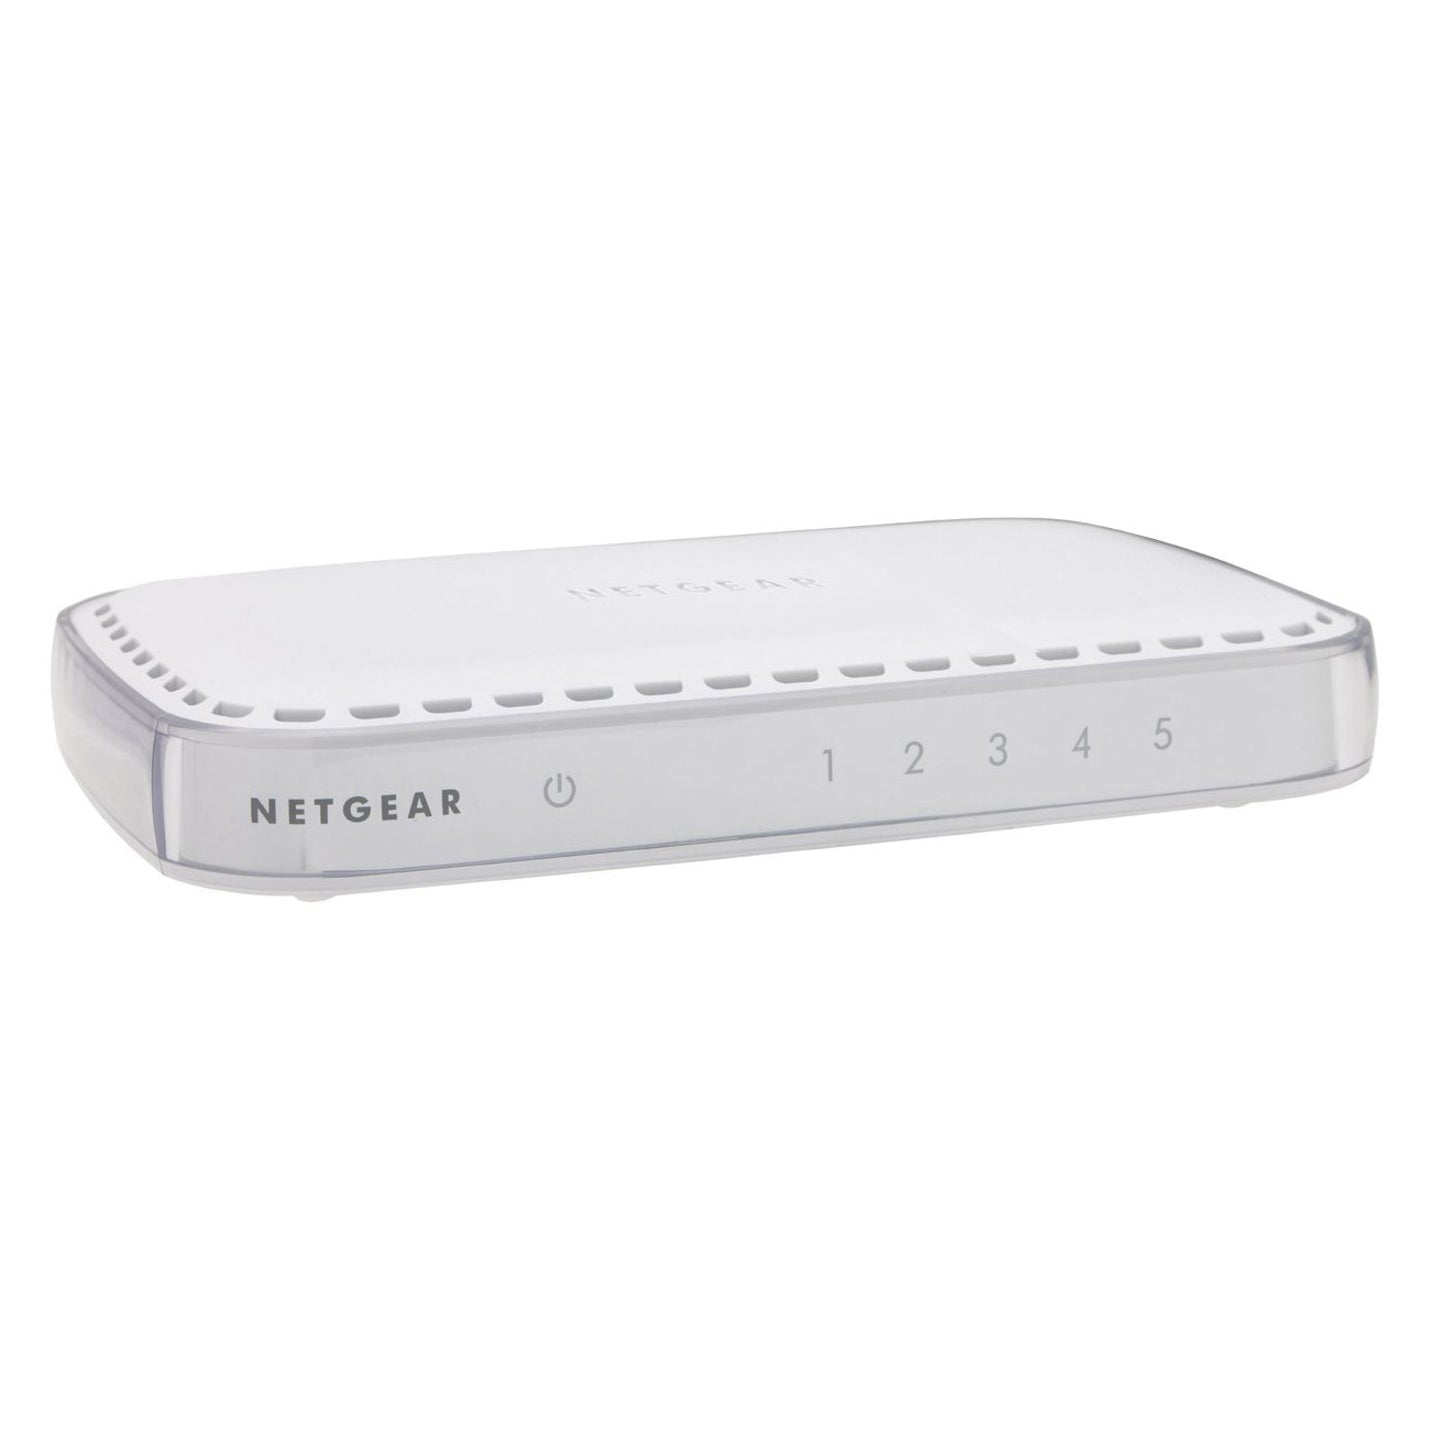 Netgear GS605NA 5-Port Gigabit Ethernet Switch, Reliable and Efficient Network Connectivity